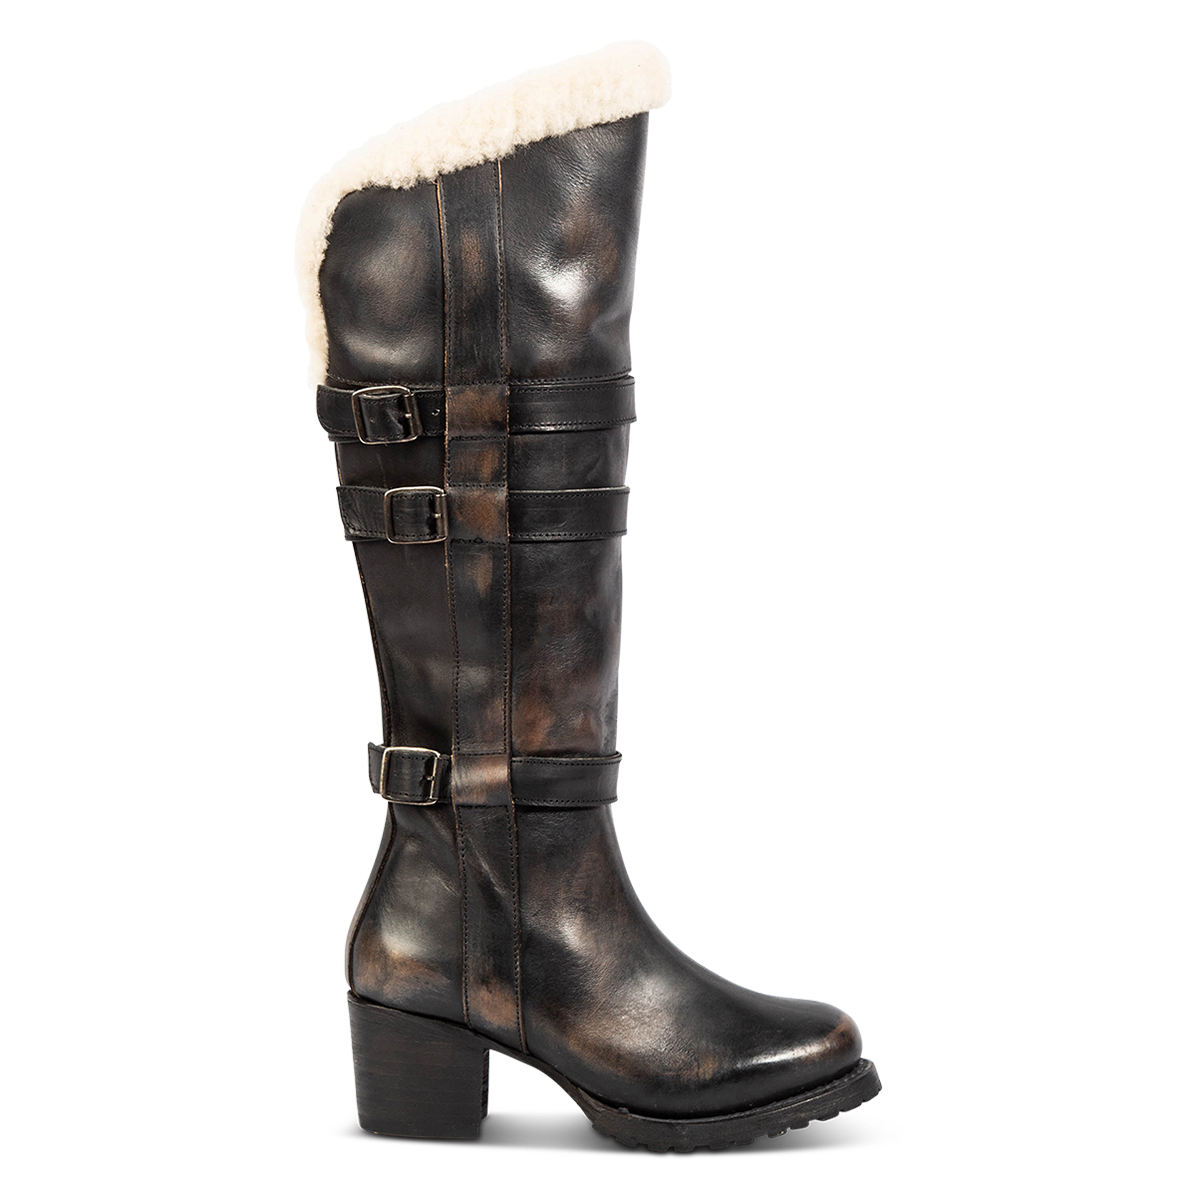 FREEBIRD women's North black leather boot with shearling top circumference lining, full inside working brass zipper and decorative shaft belts